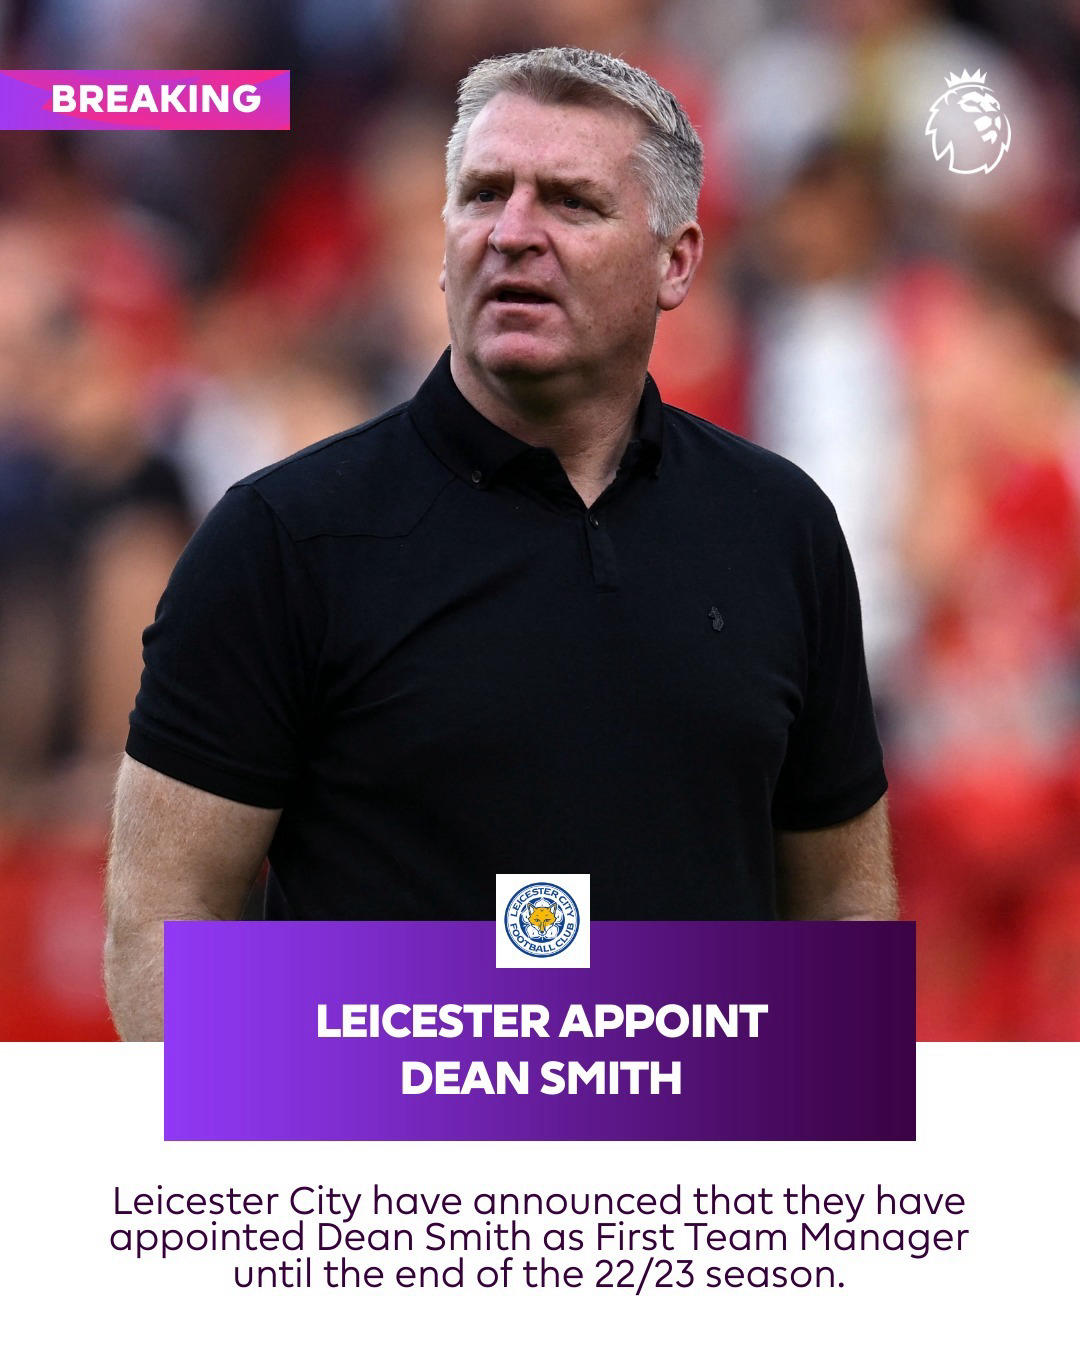 Dean Smith is #lcfc's new First Team Manager